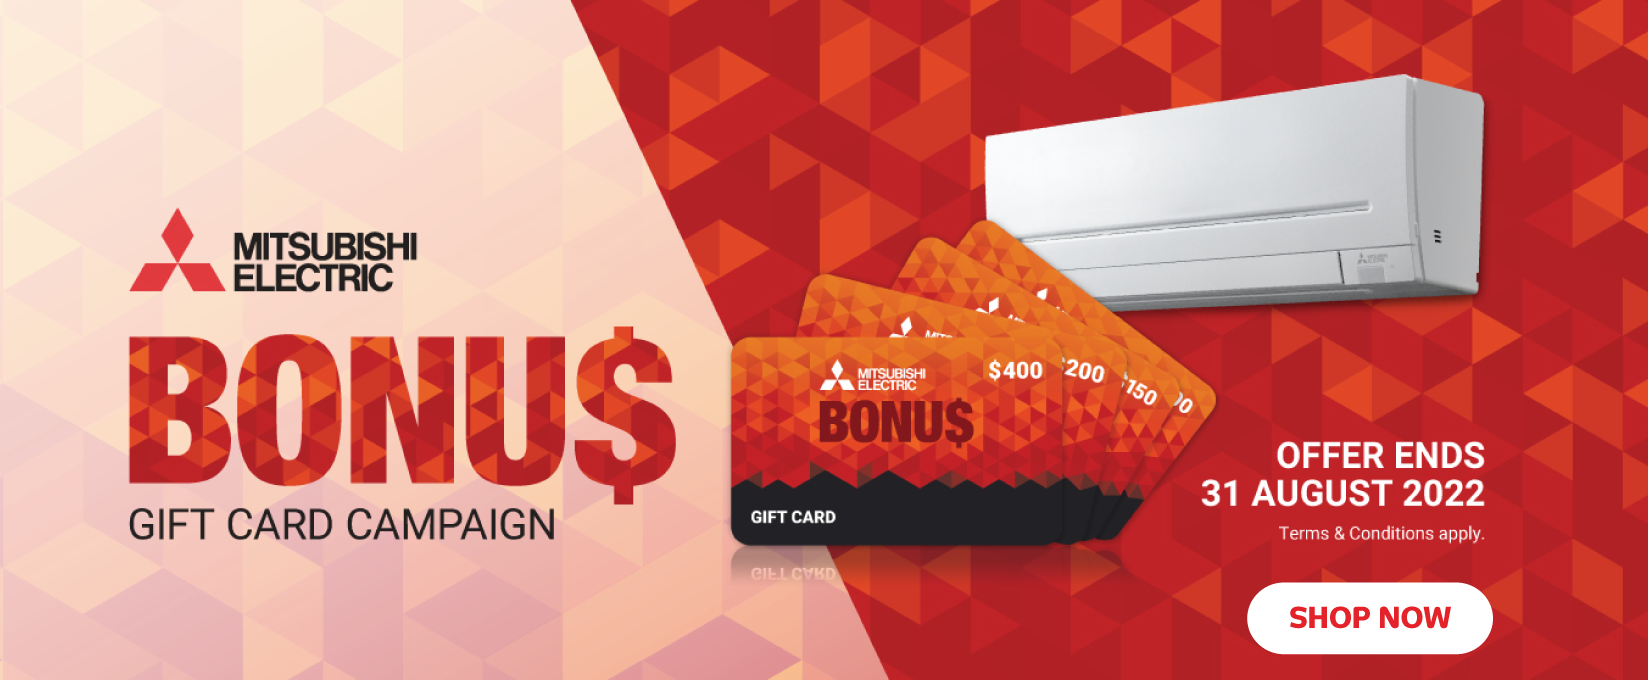 Bonus Prepaid Mastercard Valued At Up To $400 When You Purchase a Selected Mitsubishi Air Conditioner